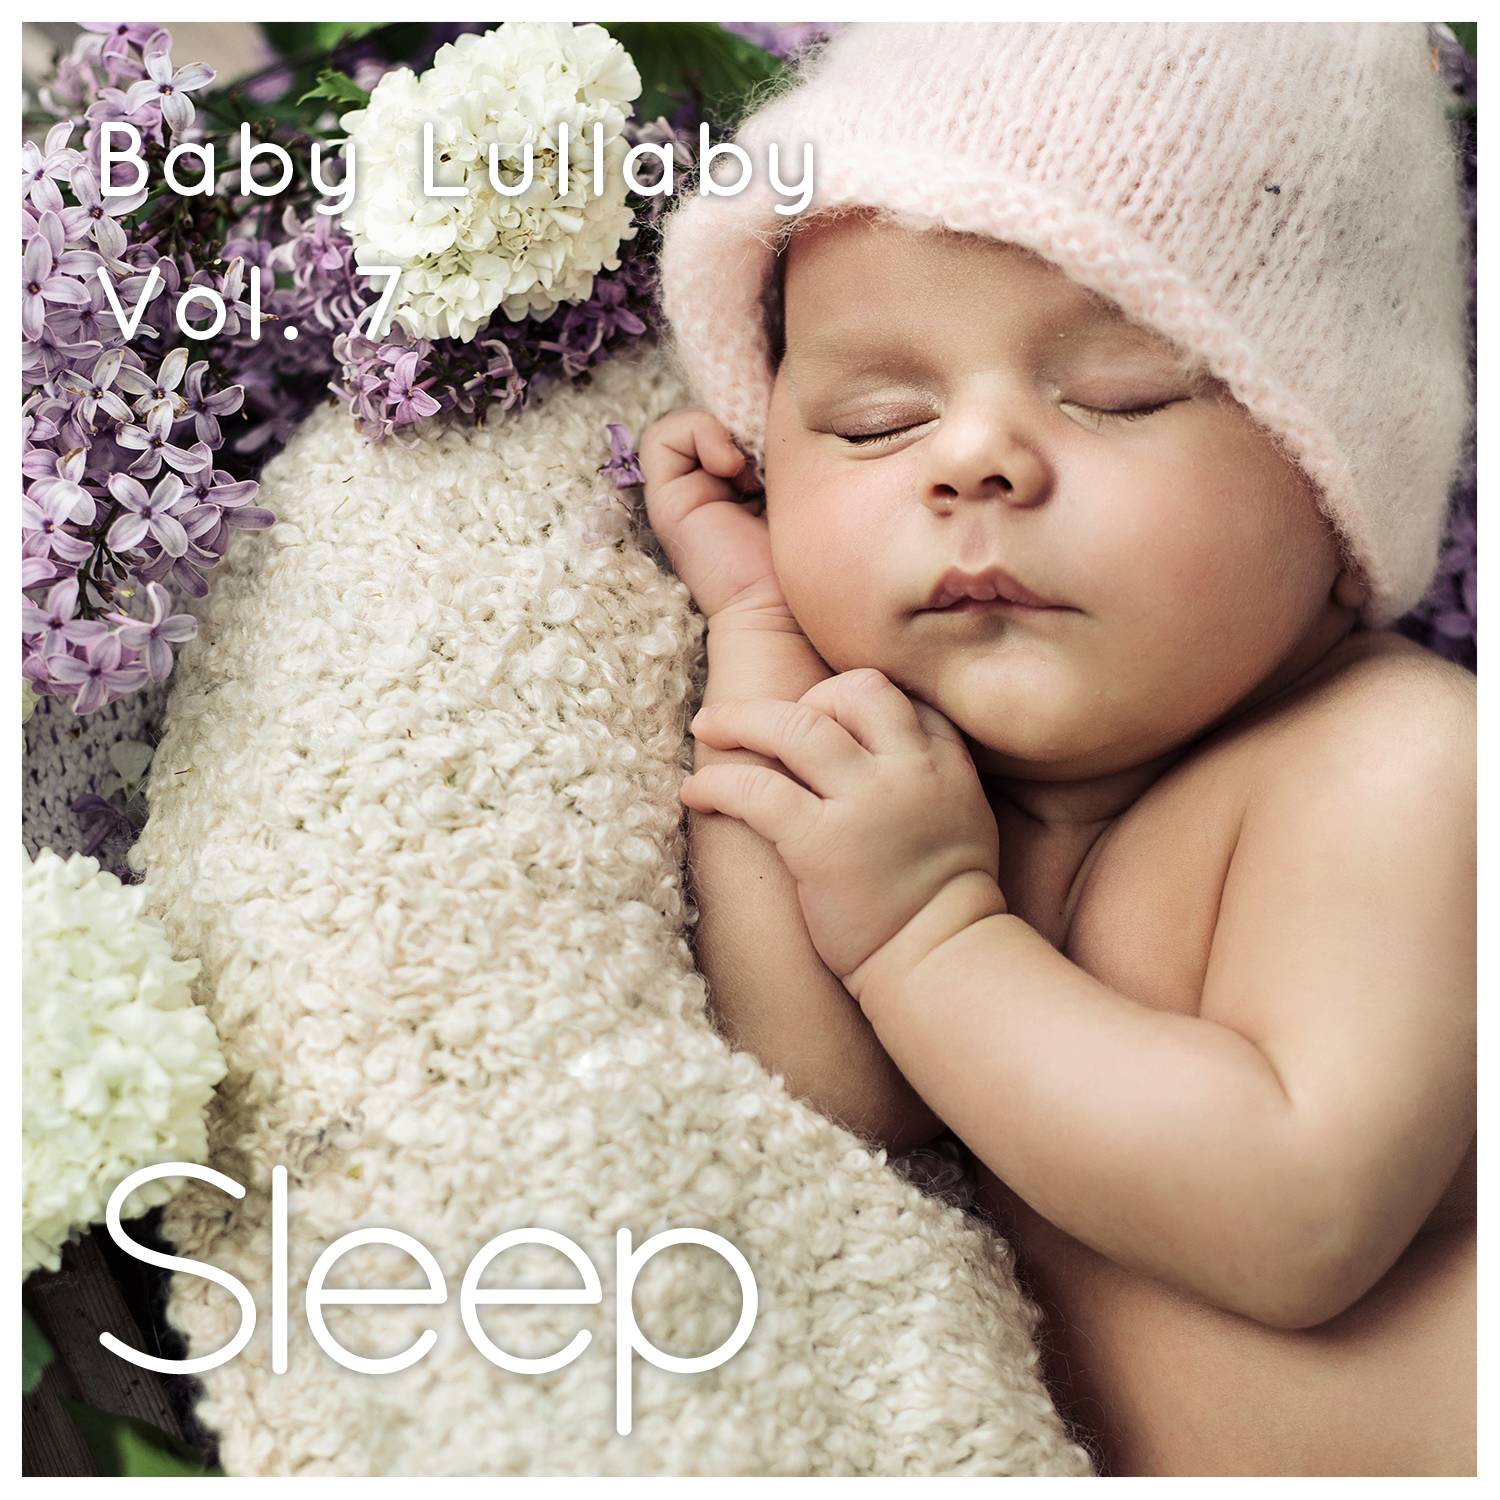 Baby Sleep Ambient Lullaby, Pt. 34